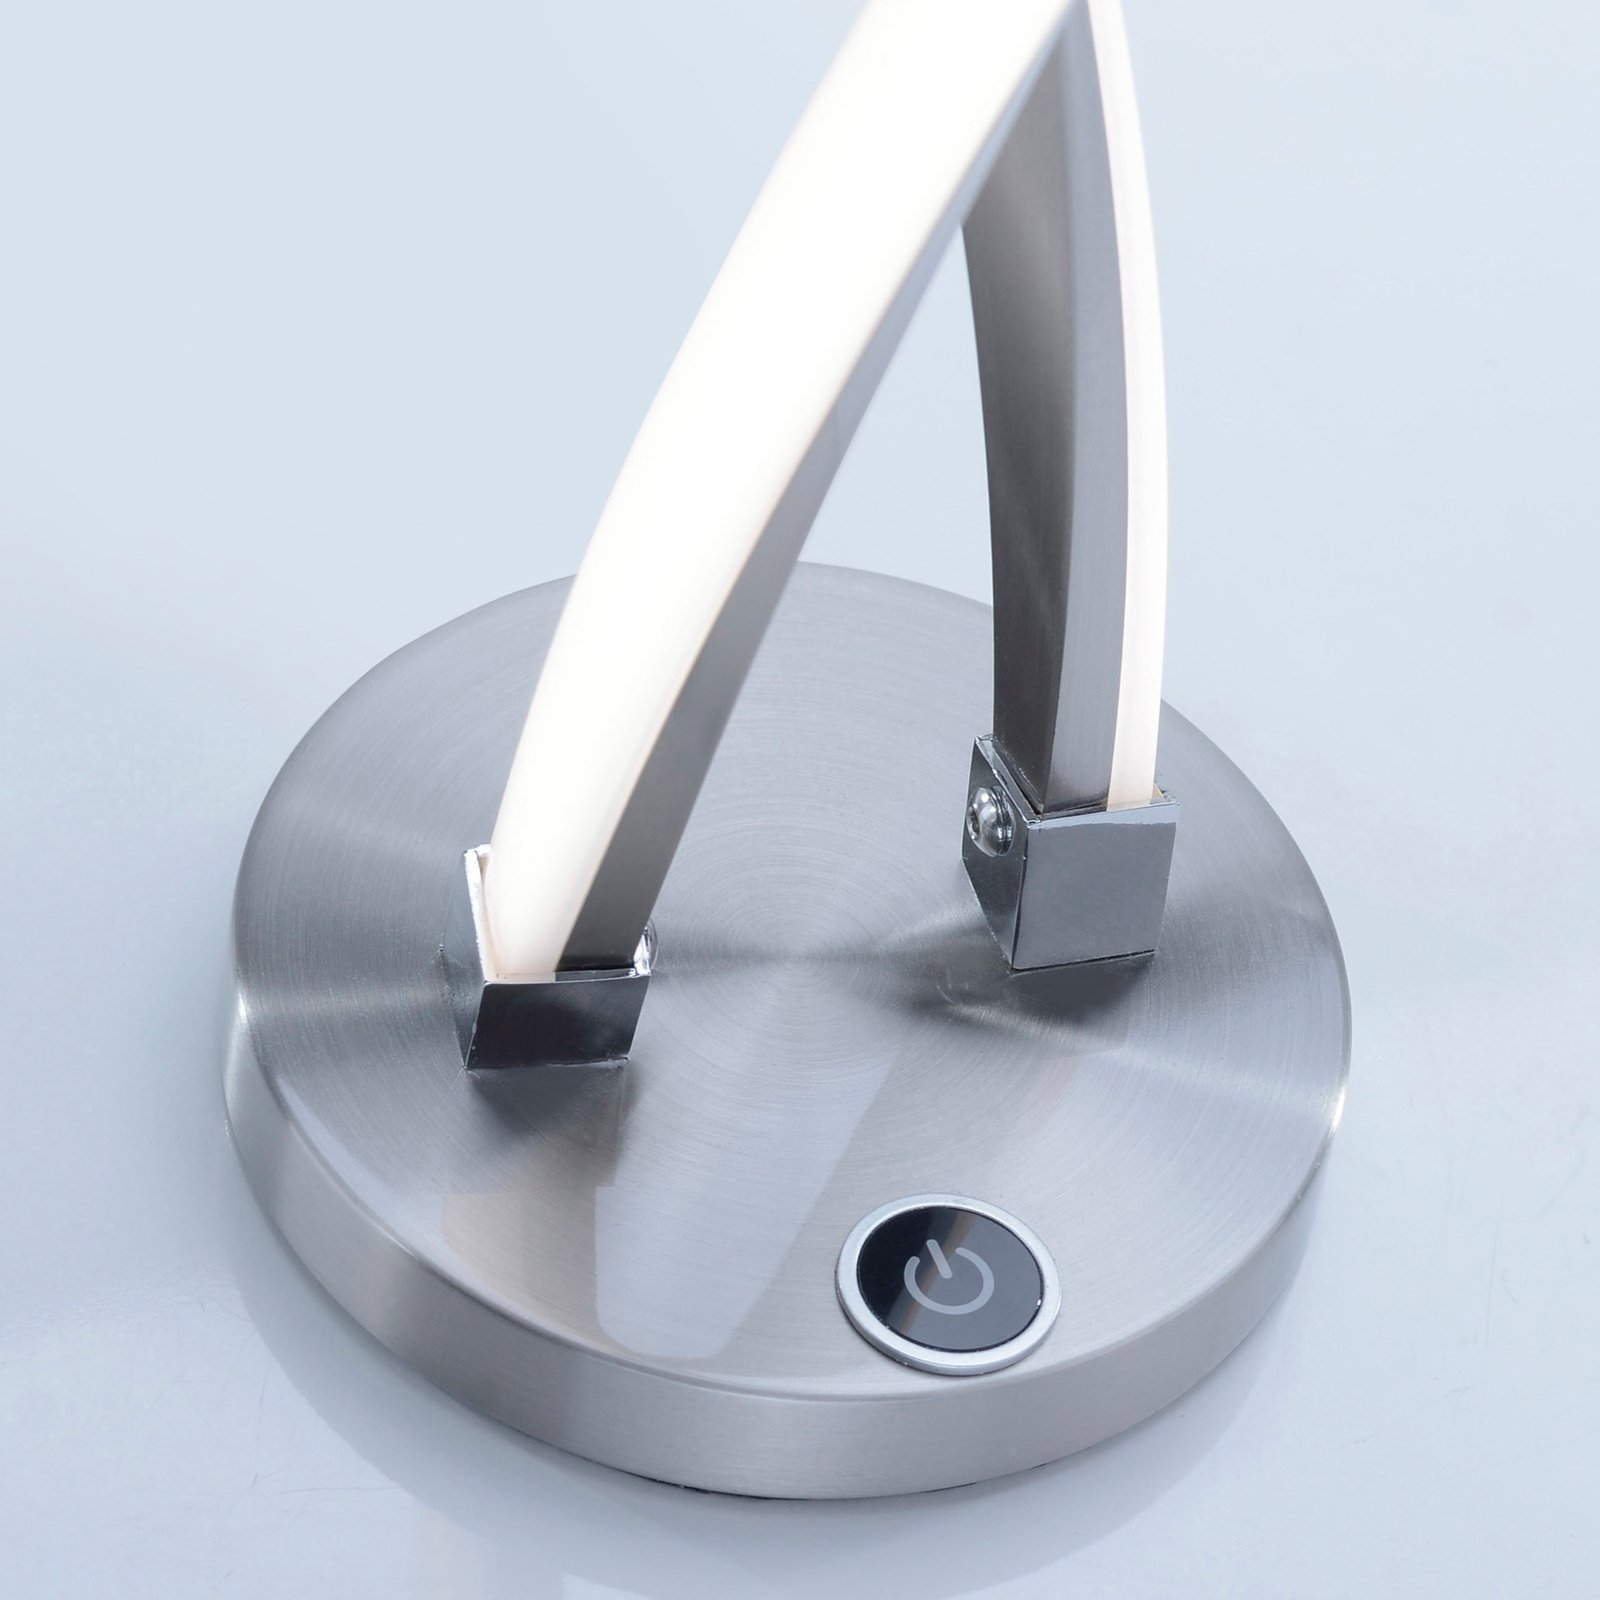 Lampe de table LED Polina, dimmable